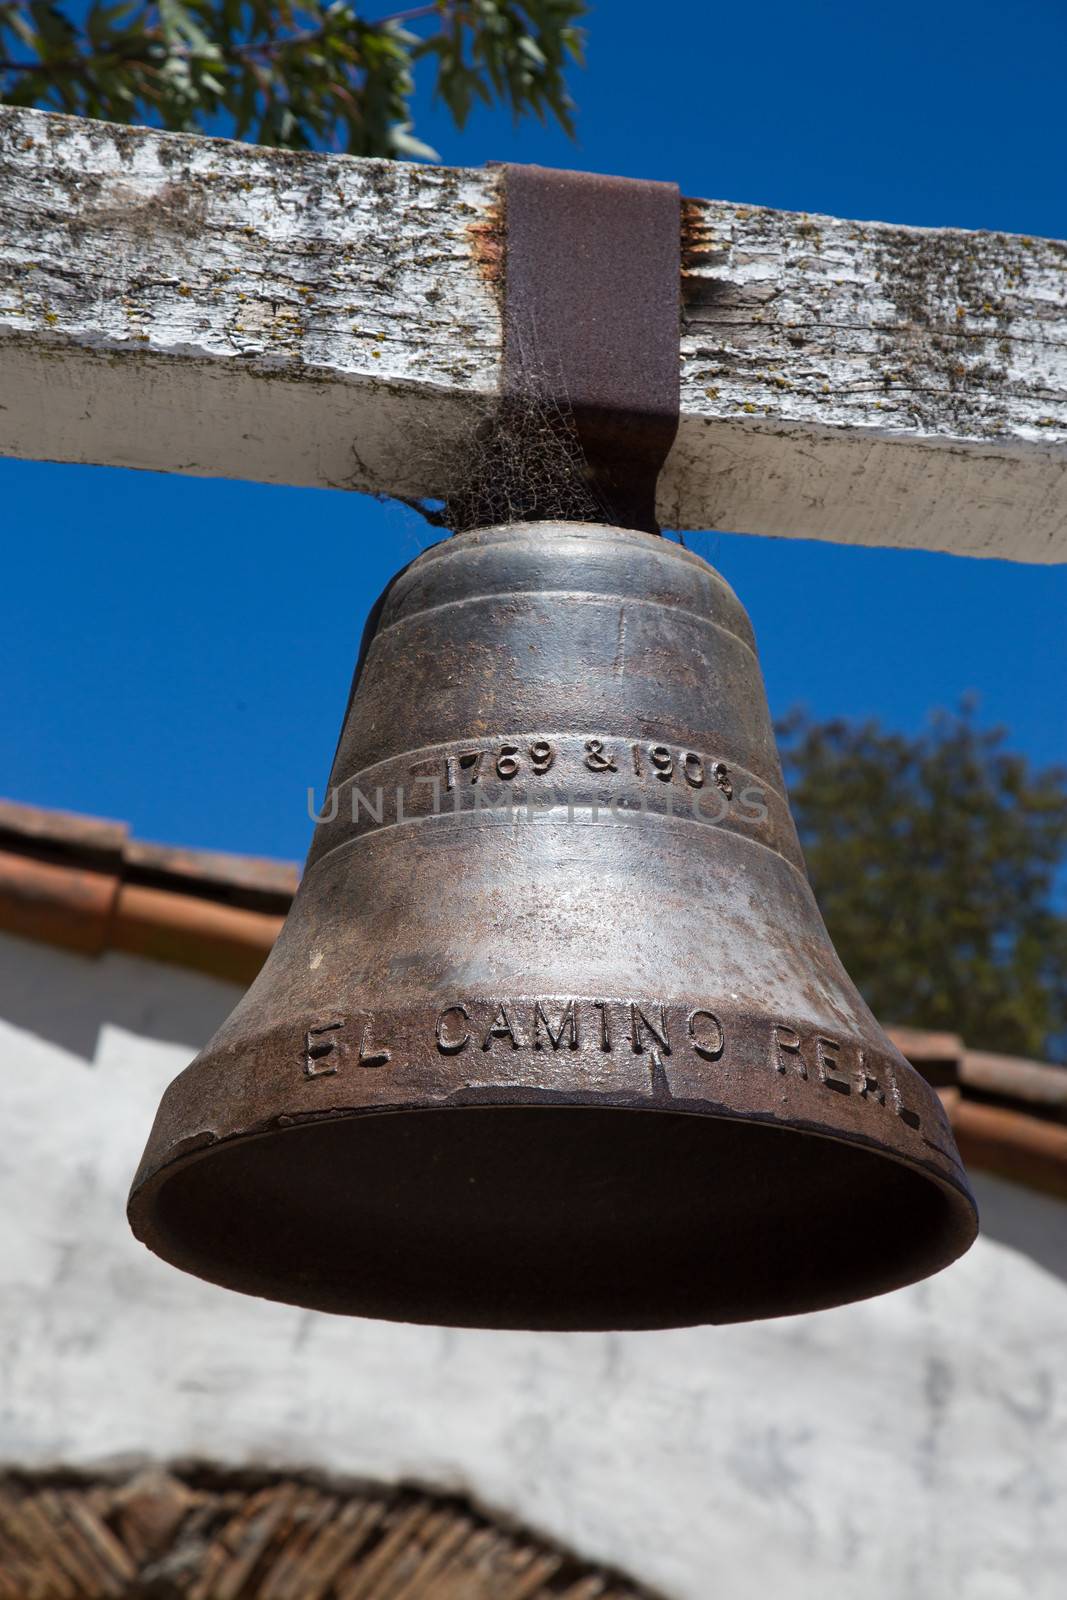 Throughout California , the California Mission Trail is adorned with Historic Bells Noting the Path